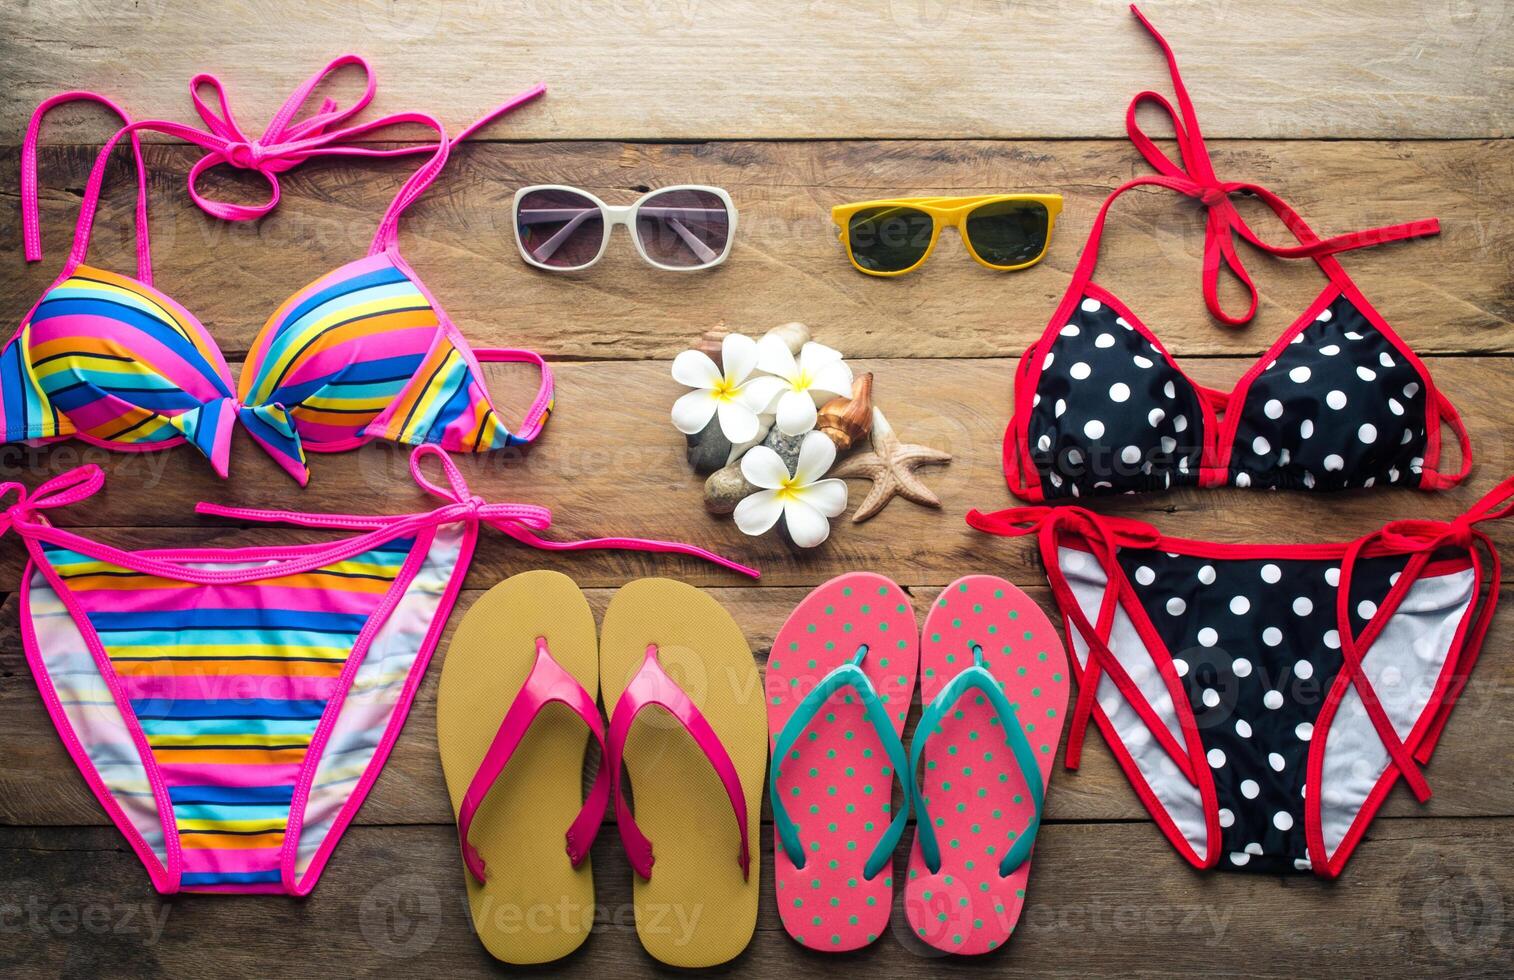 Bikinis, sunglasses, shoes, two sets placed on a wooden floor photo